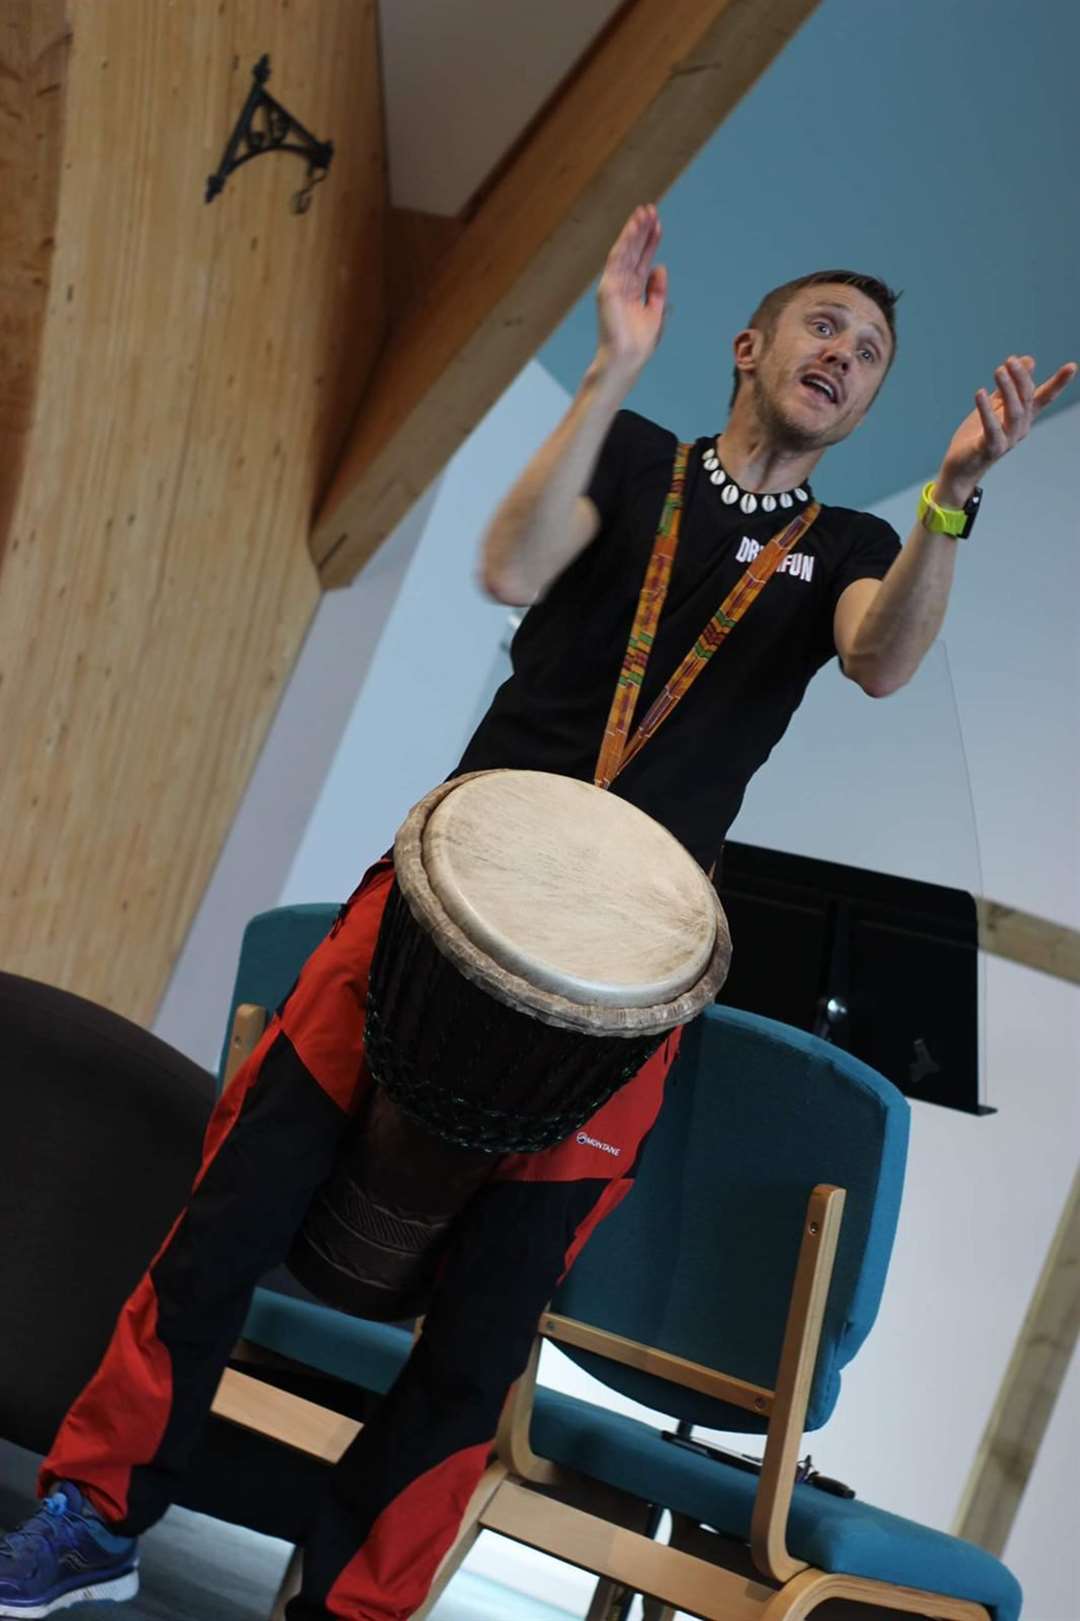 You can try out interactive drumming at the Family Fun day.